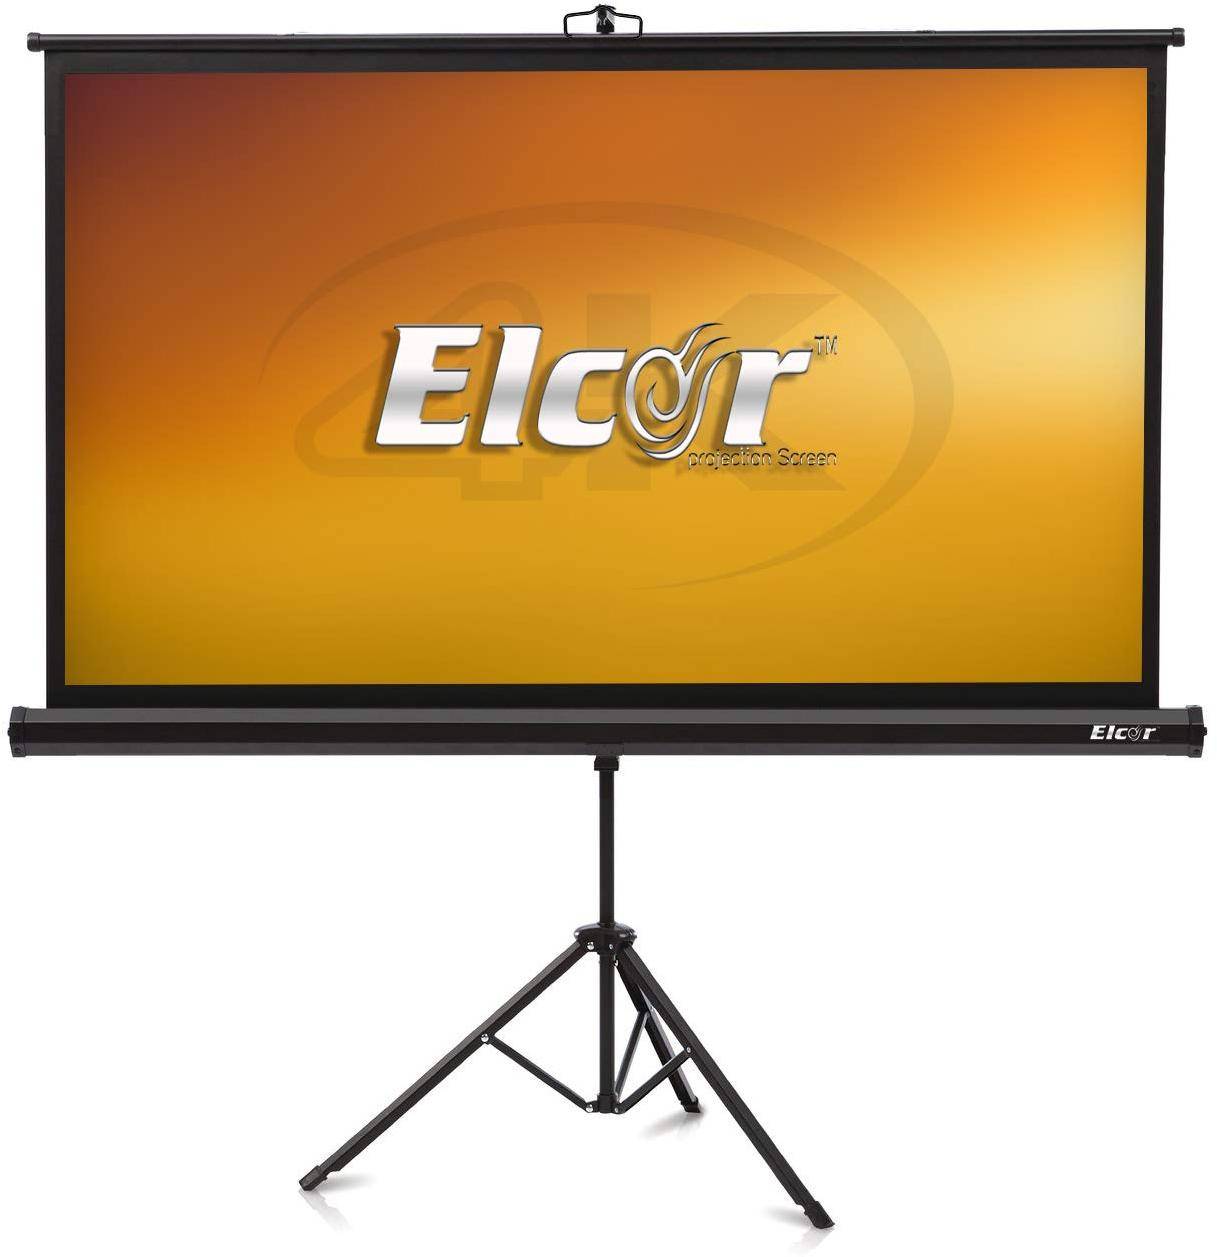 Elcor Tripod 3D and 4K Technology 120 inch 8 x 6 ft Projector Screen with Heavy Stand zoom image